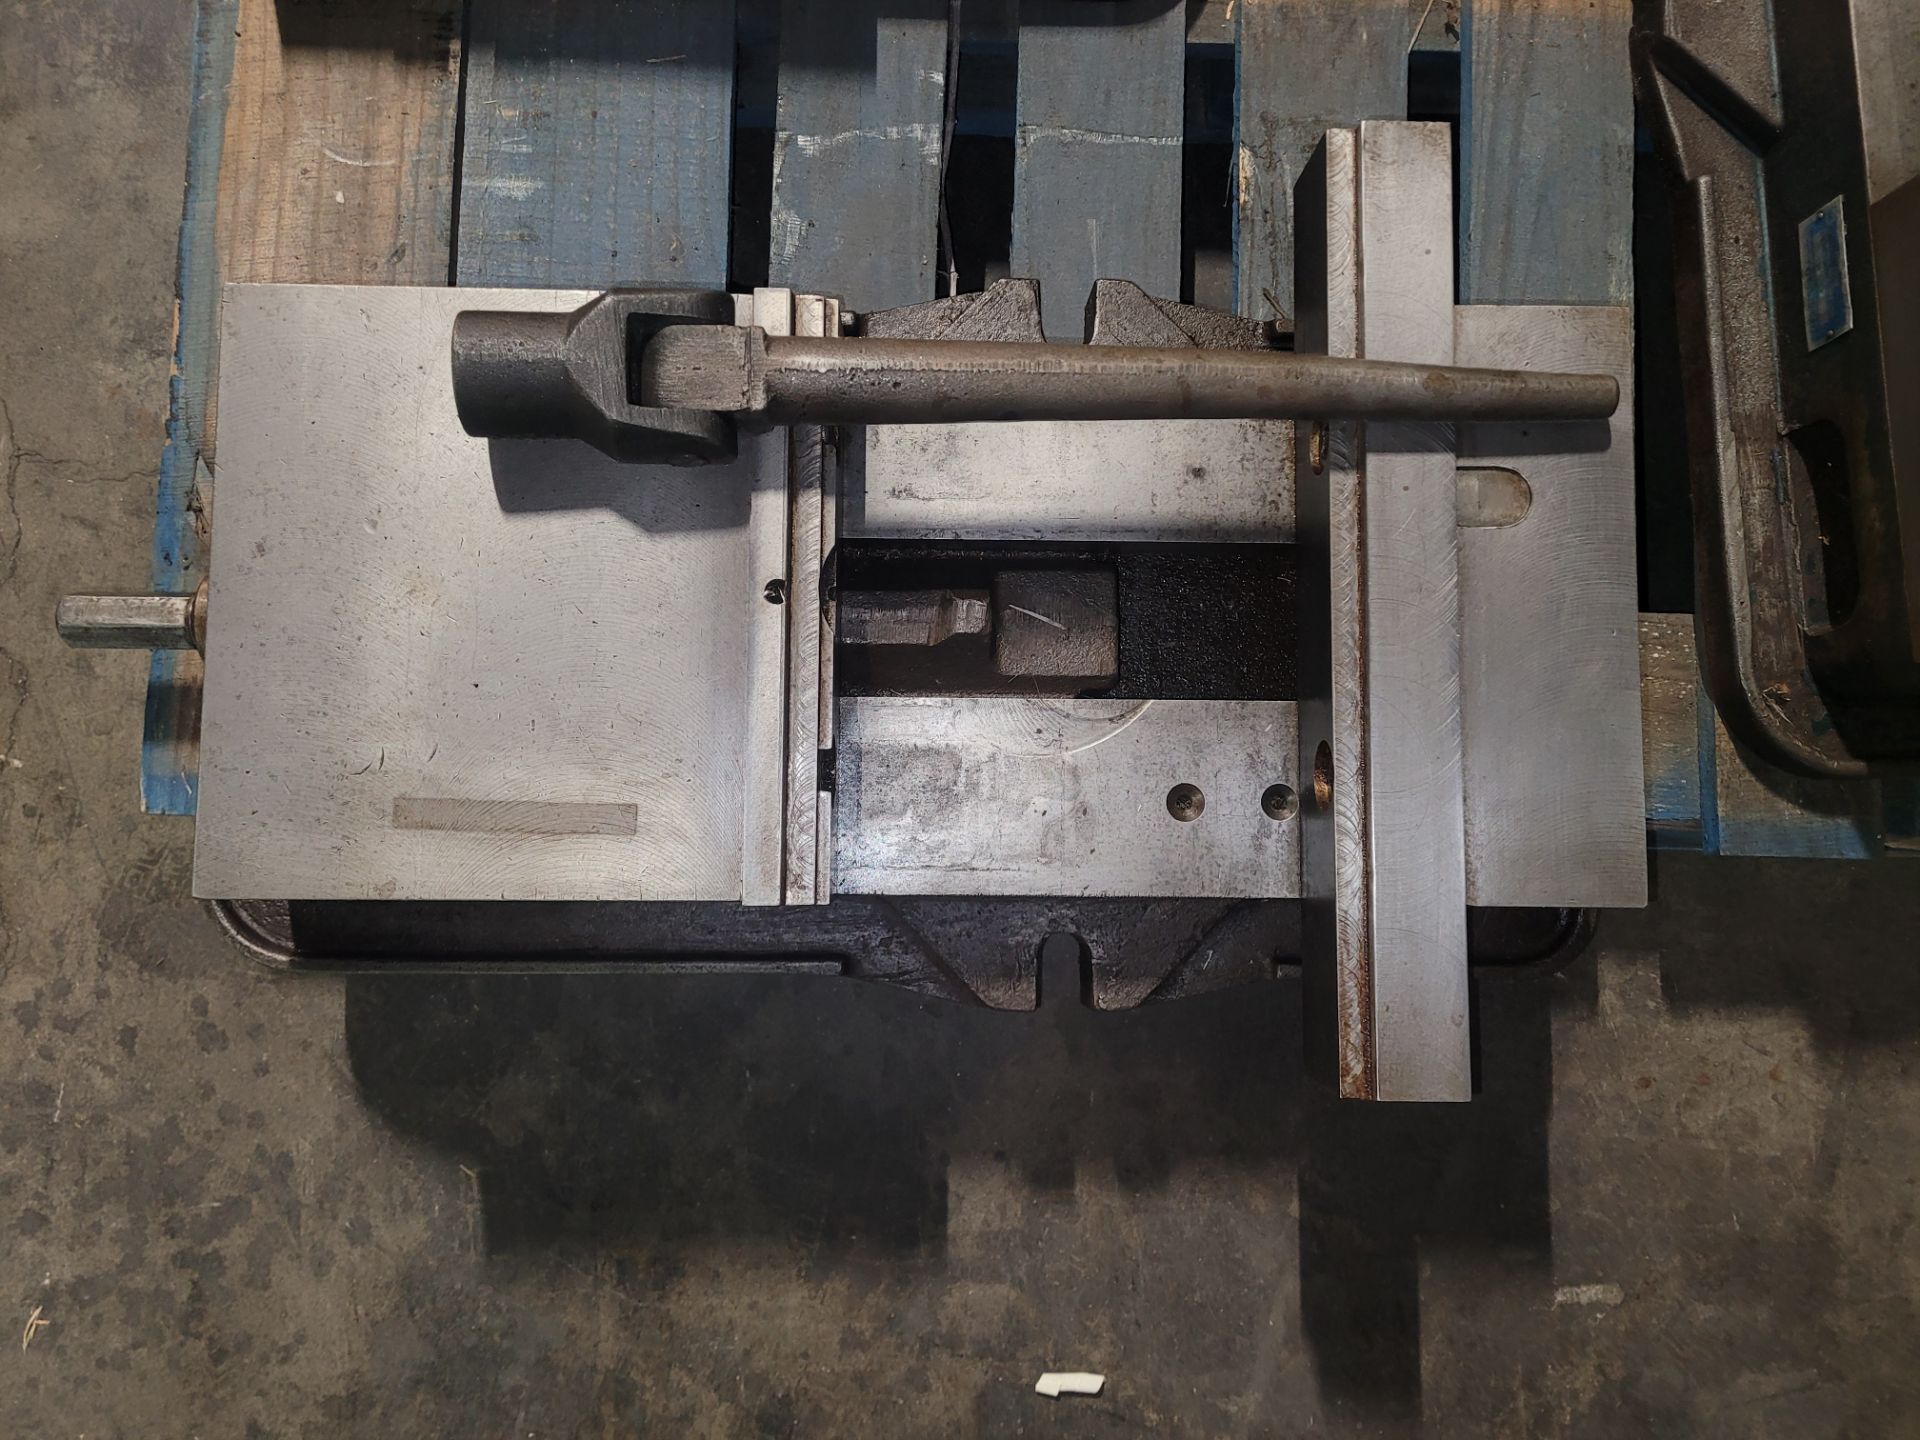 ANGLE LOCK PRECISION MACHINE VISE, KURT 10" MDL. D (Packing & Crating Charge $50.00) (Located at: